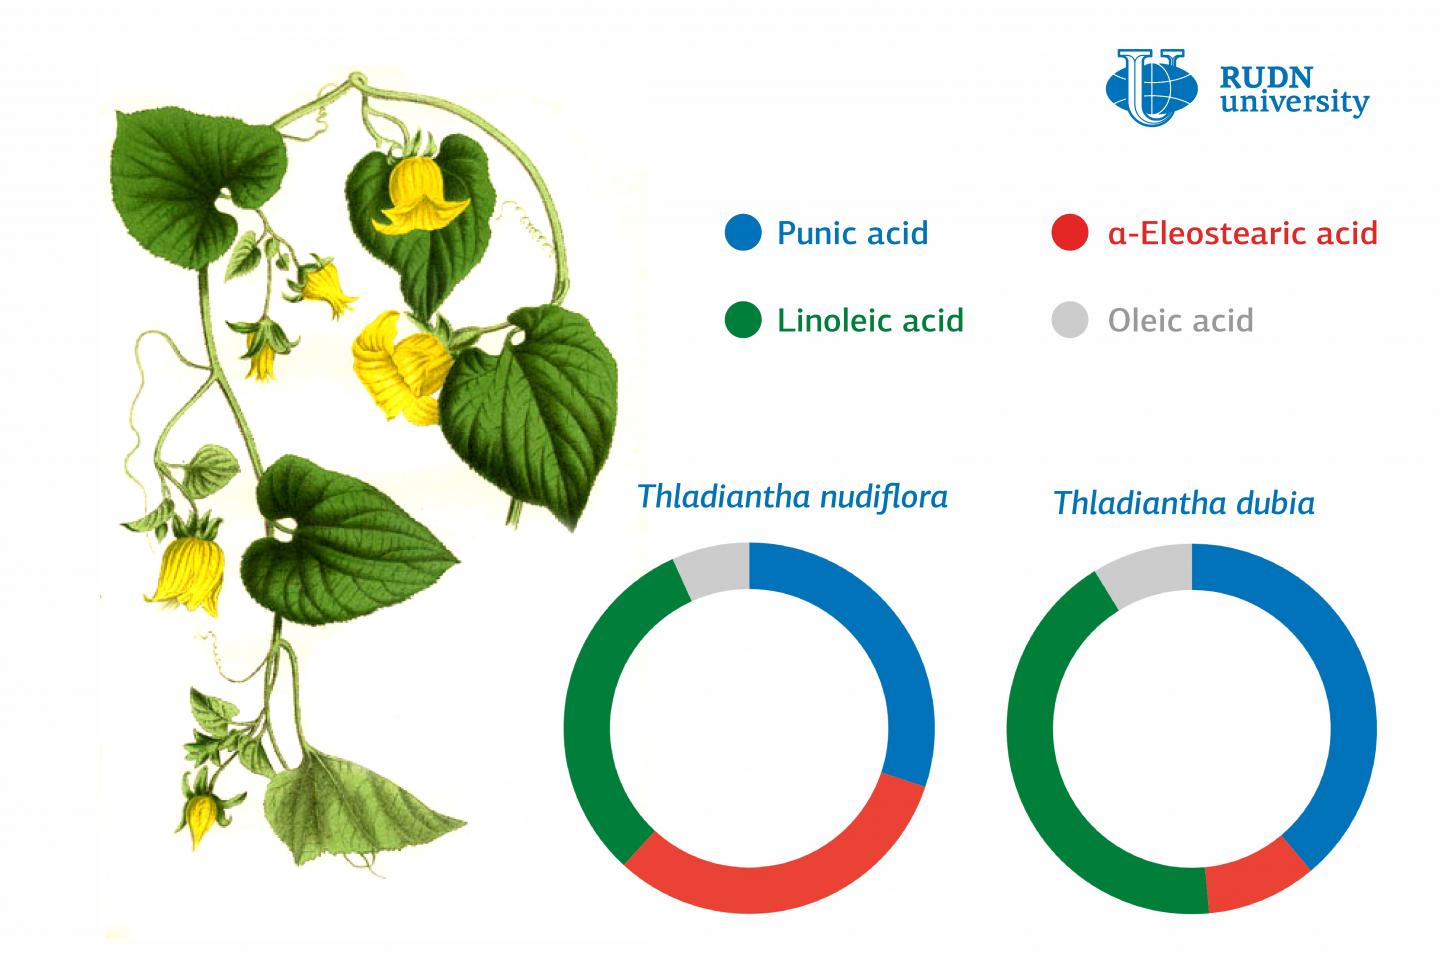 Chemists Studied the Composition of Oils Extracted from Popular Medicinal Plants